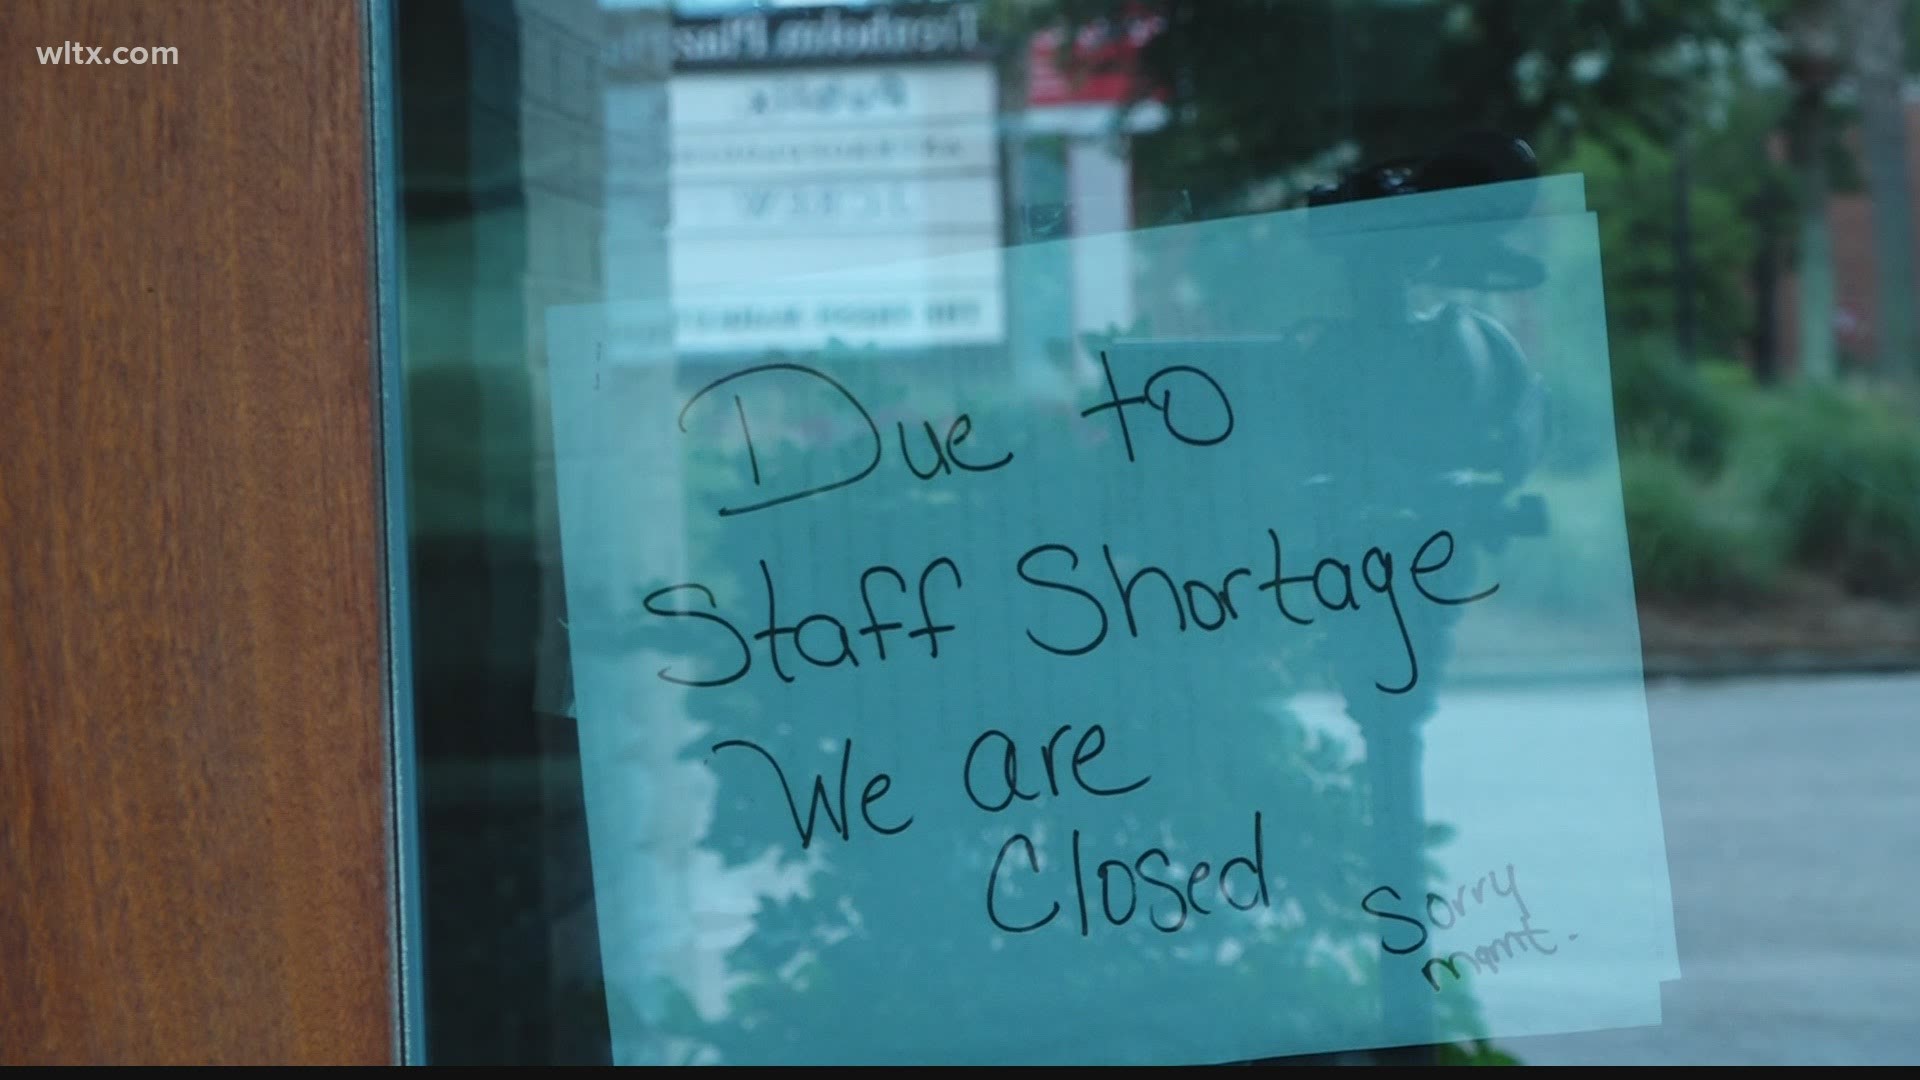 While the state's unemployment numbers are the lowest in four months, some businesses are still struggling to find staff to stay afloat.